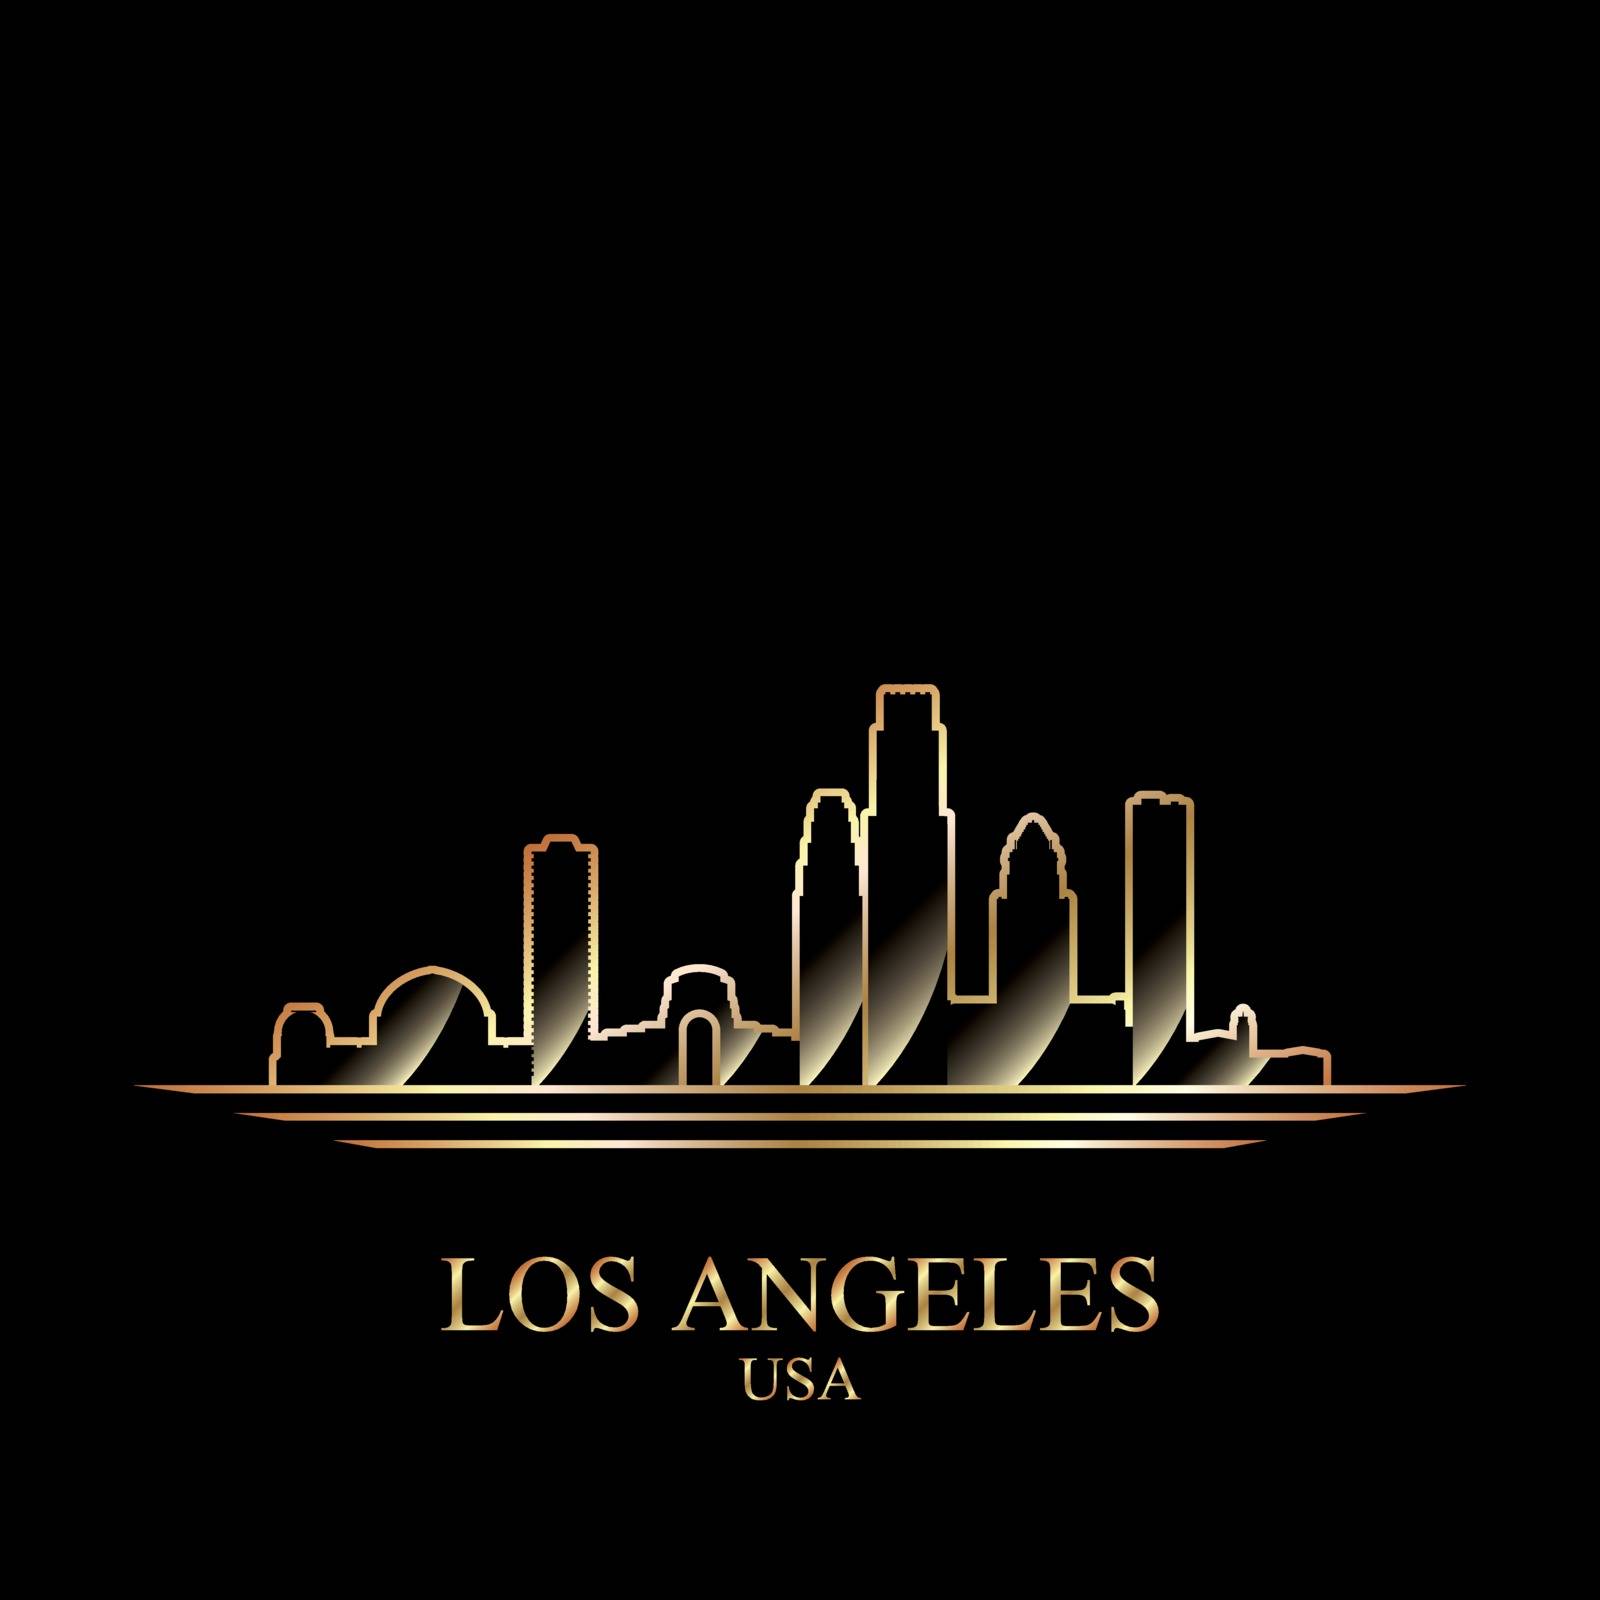 Gold silhouette of Los Angeles on black background, vector illustration